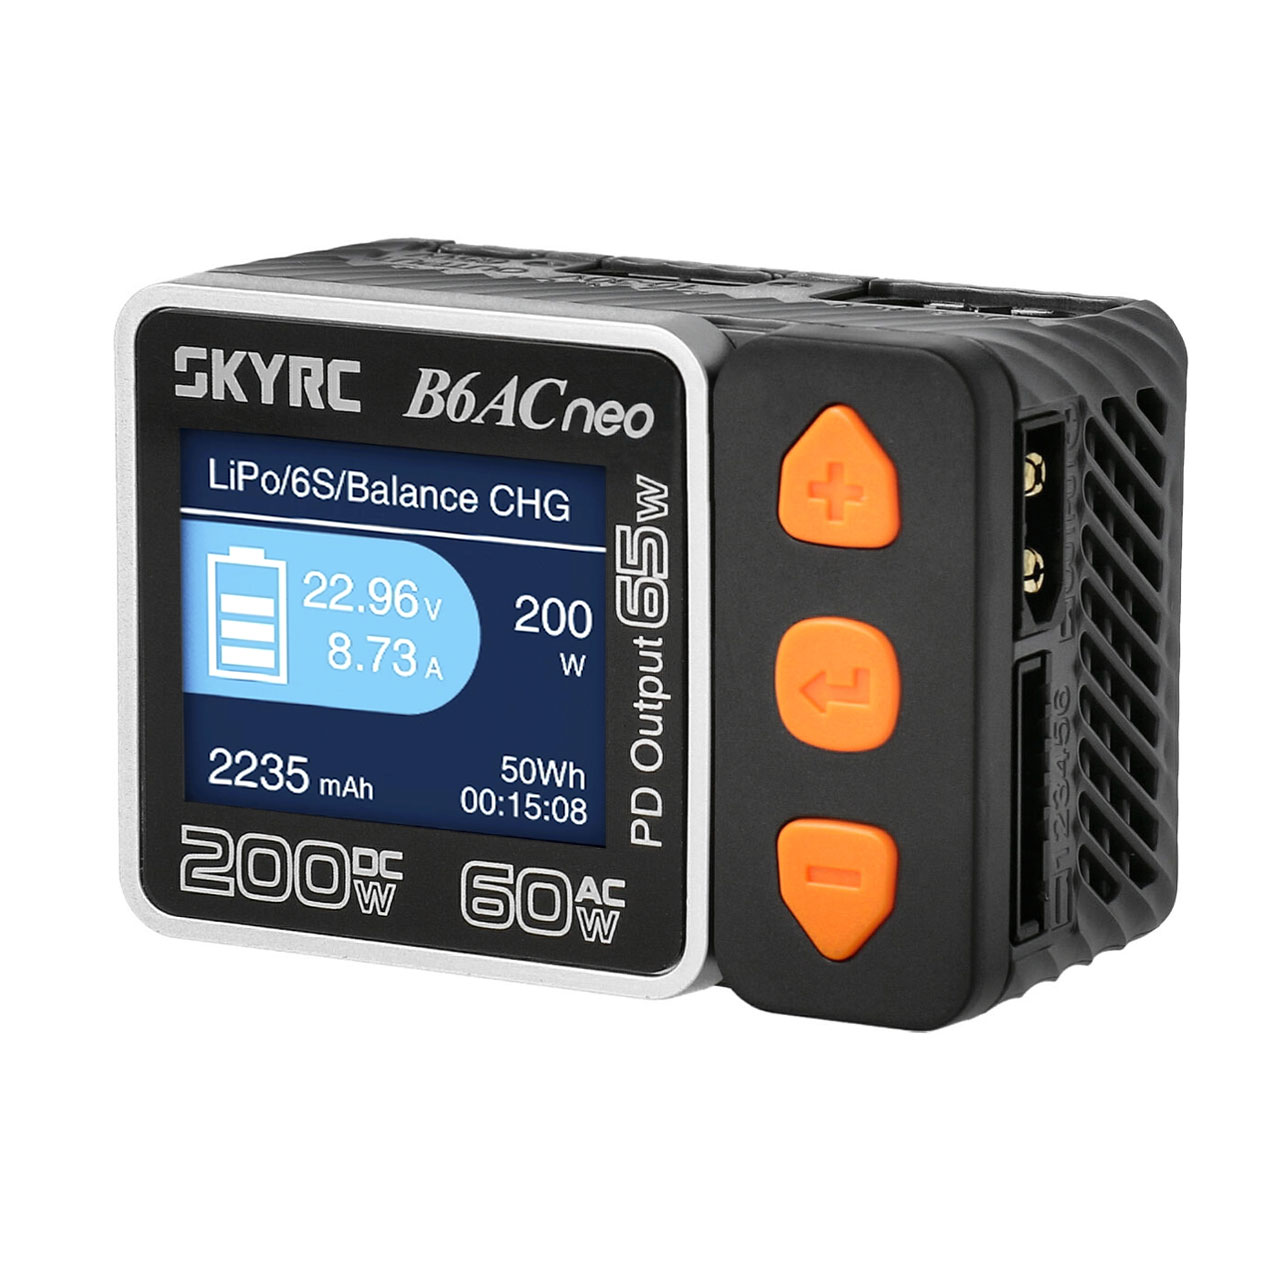 SkyRC D200neo Smart Charger Analyzer AC/DC for RC 1-6S LiPo LiFe LiIon  Battery